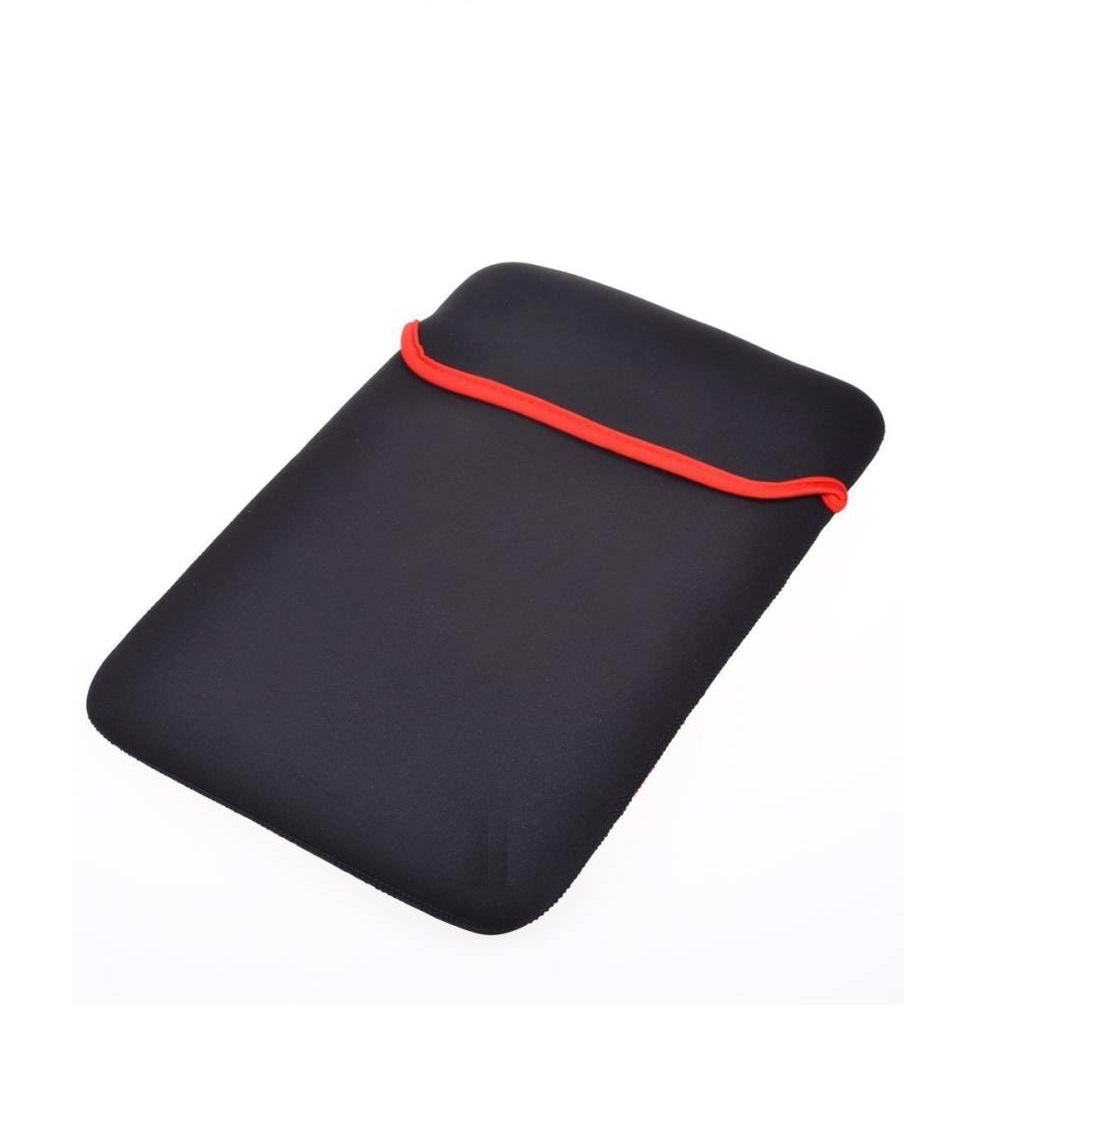 Buy 15.6 Reversible Laptop Sleeve Bag Case Pouch for all Laptops ...